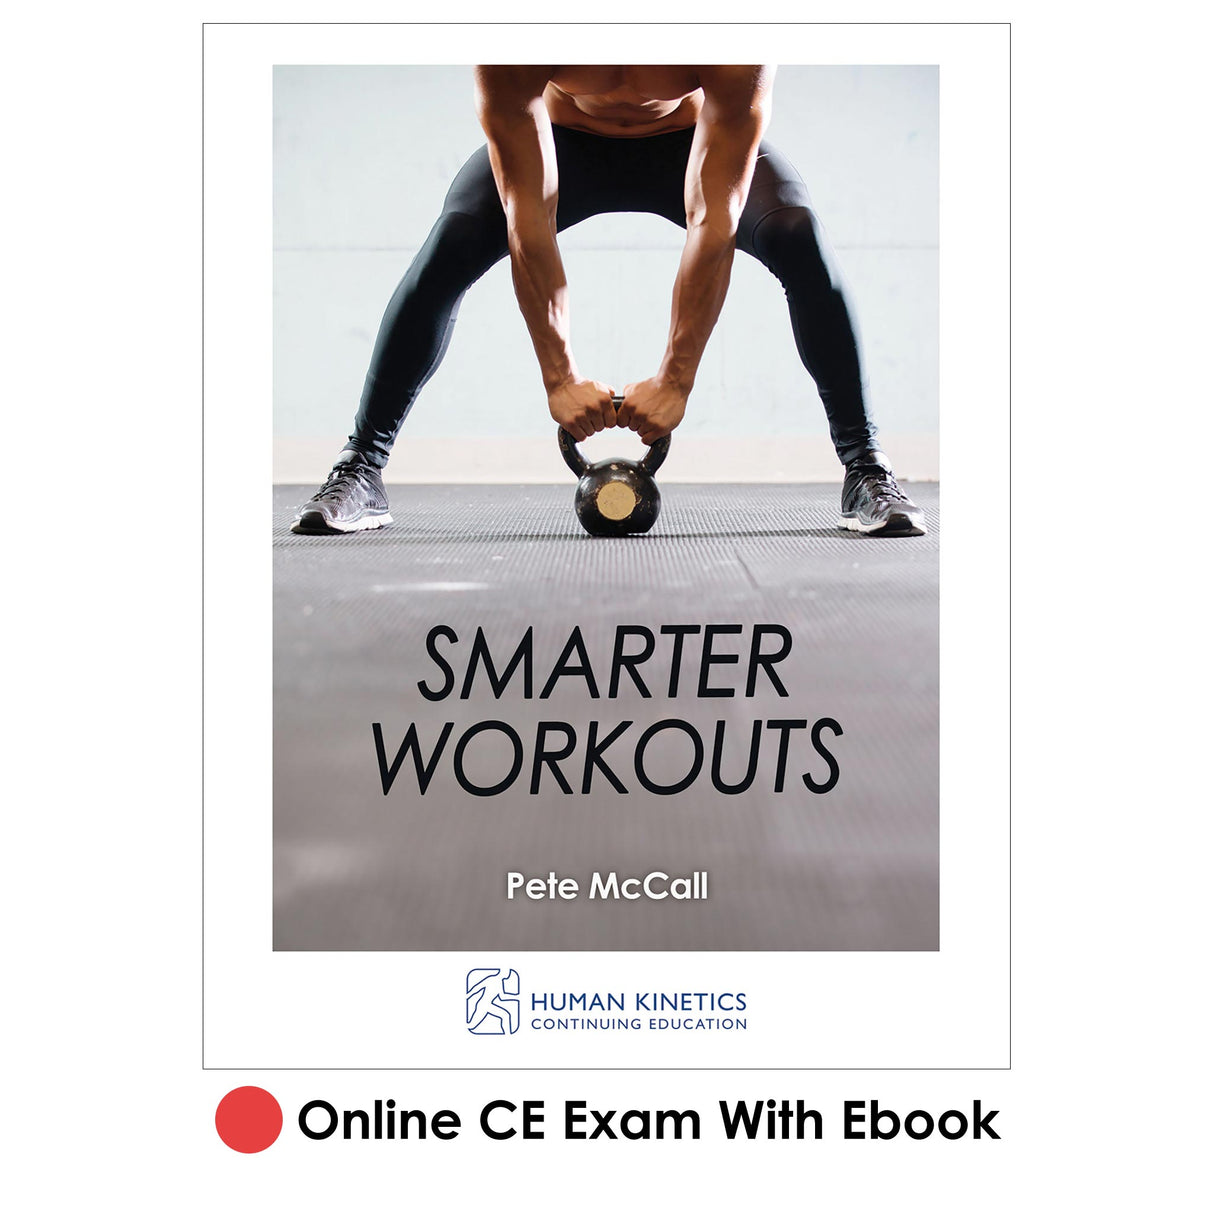 Smarter Workouts Online CE Exam With Ebook